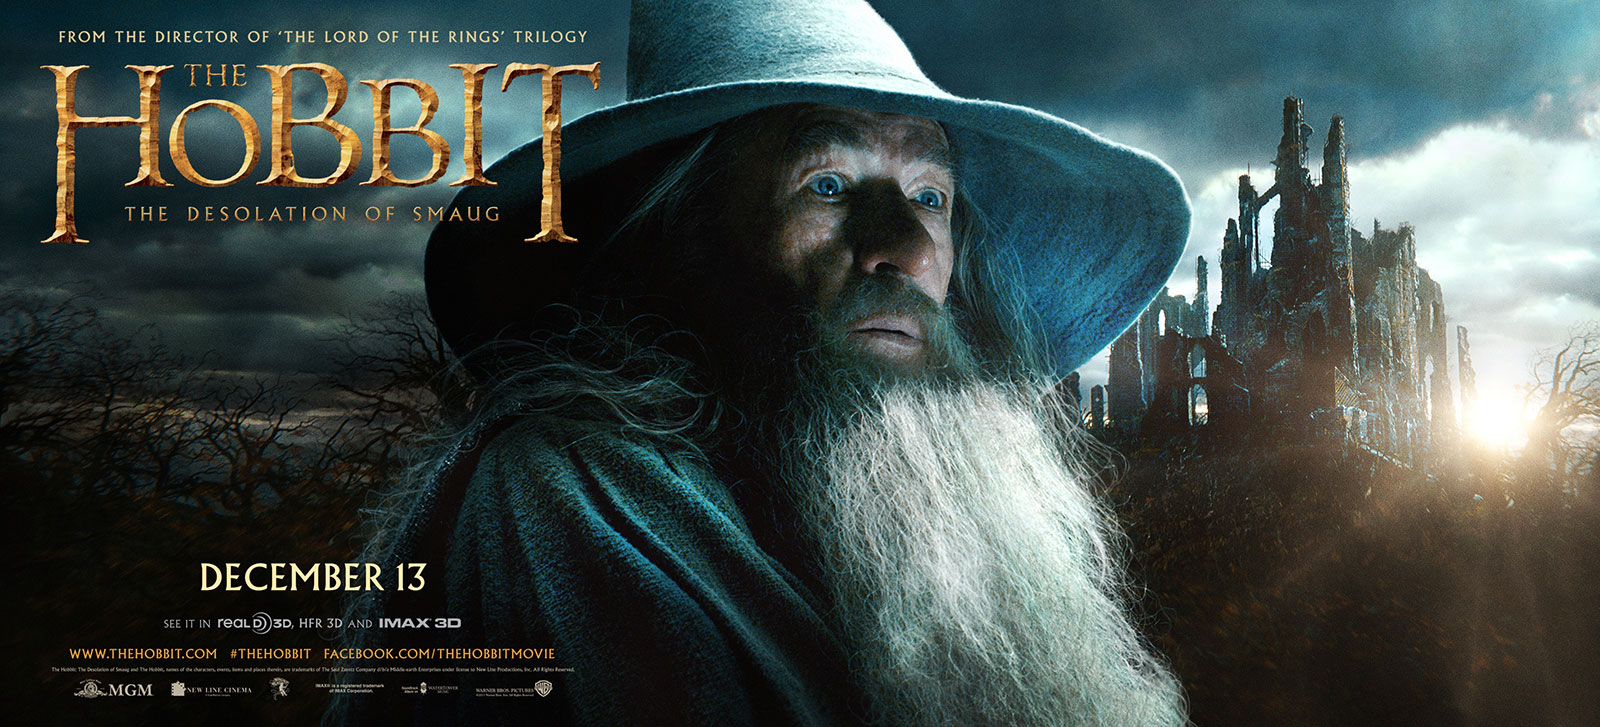 Billboard for THE HOBBIT: THE DESOLATION OF SMAUG featuring Ian McKellen as Gandalf